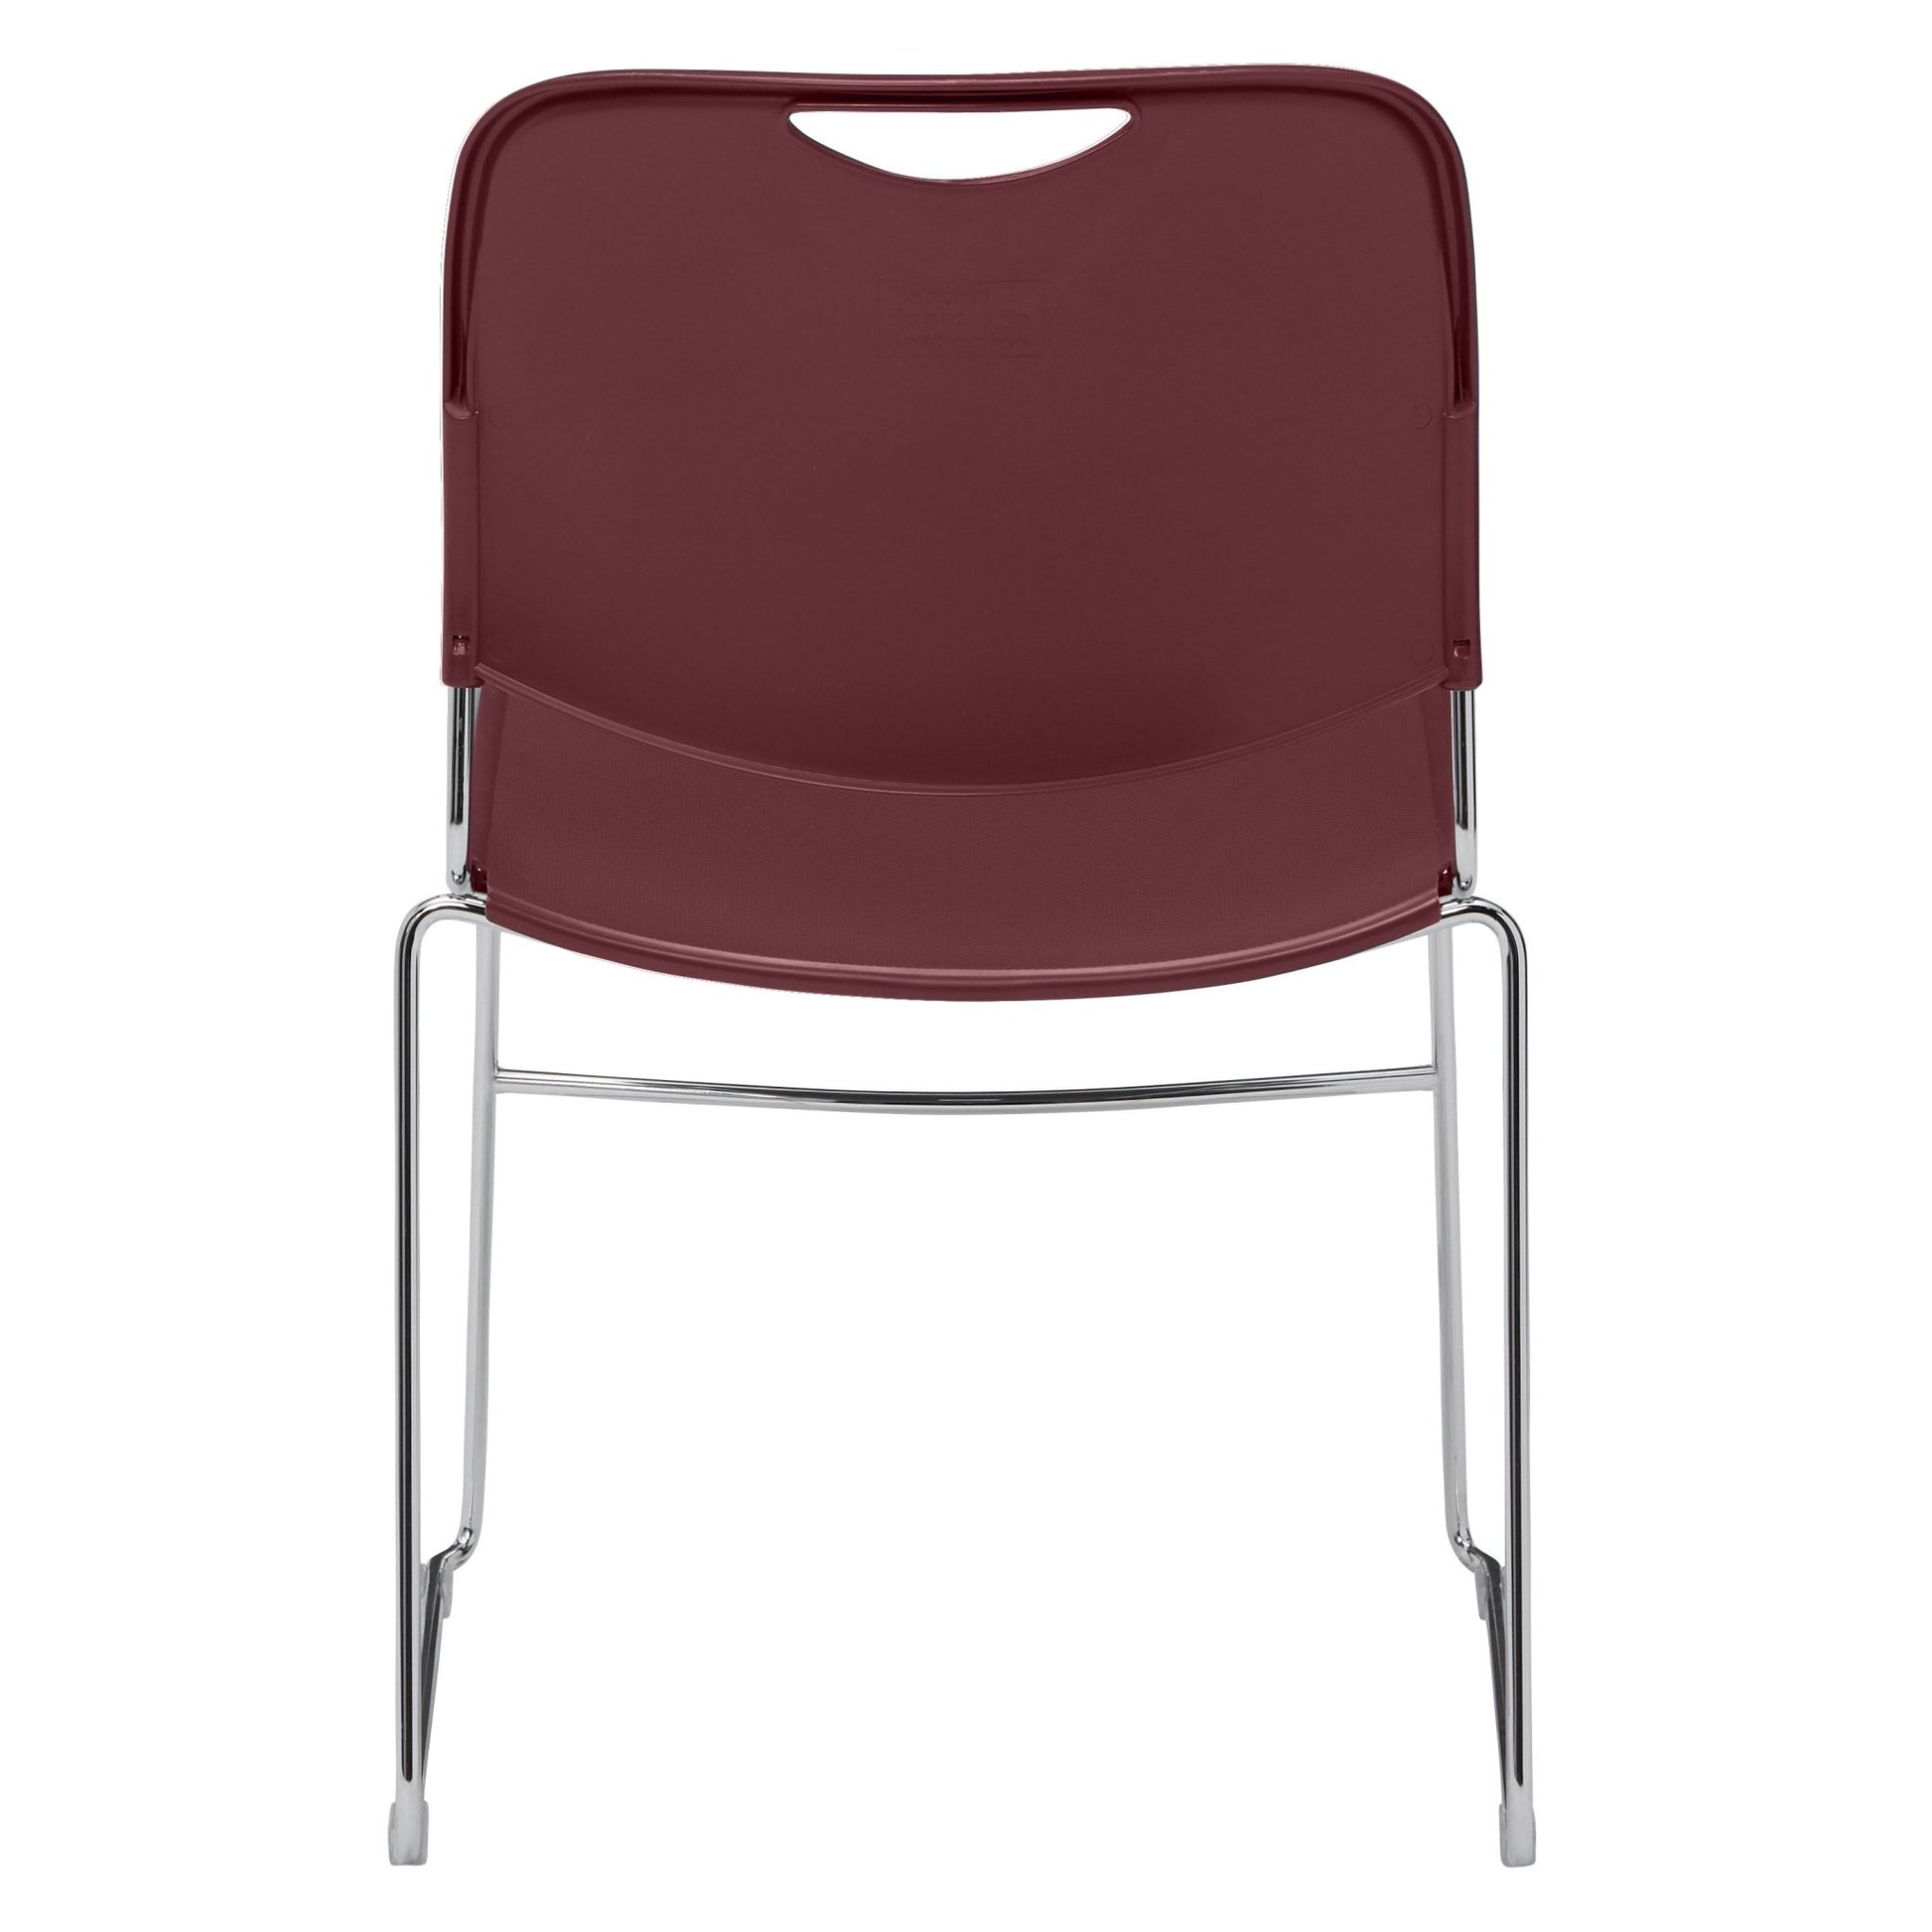 NPS 8500 Series Hi-Tech Ultra-Compact Stacker Plastic Stack Chair, (National Public Seating NPS-8500) - SchoolOutlet